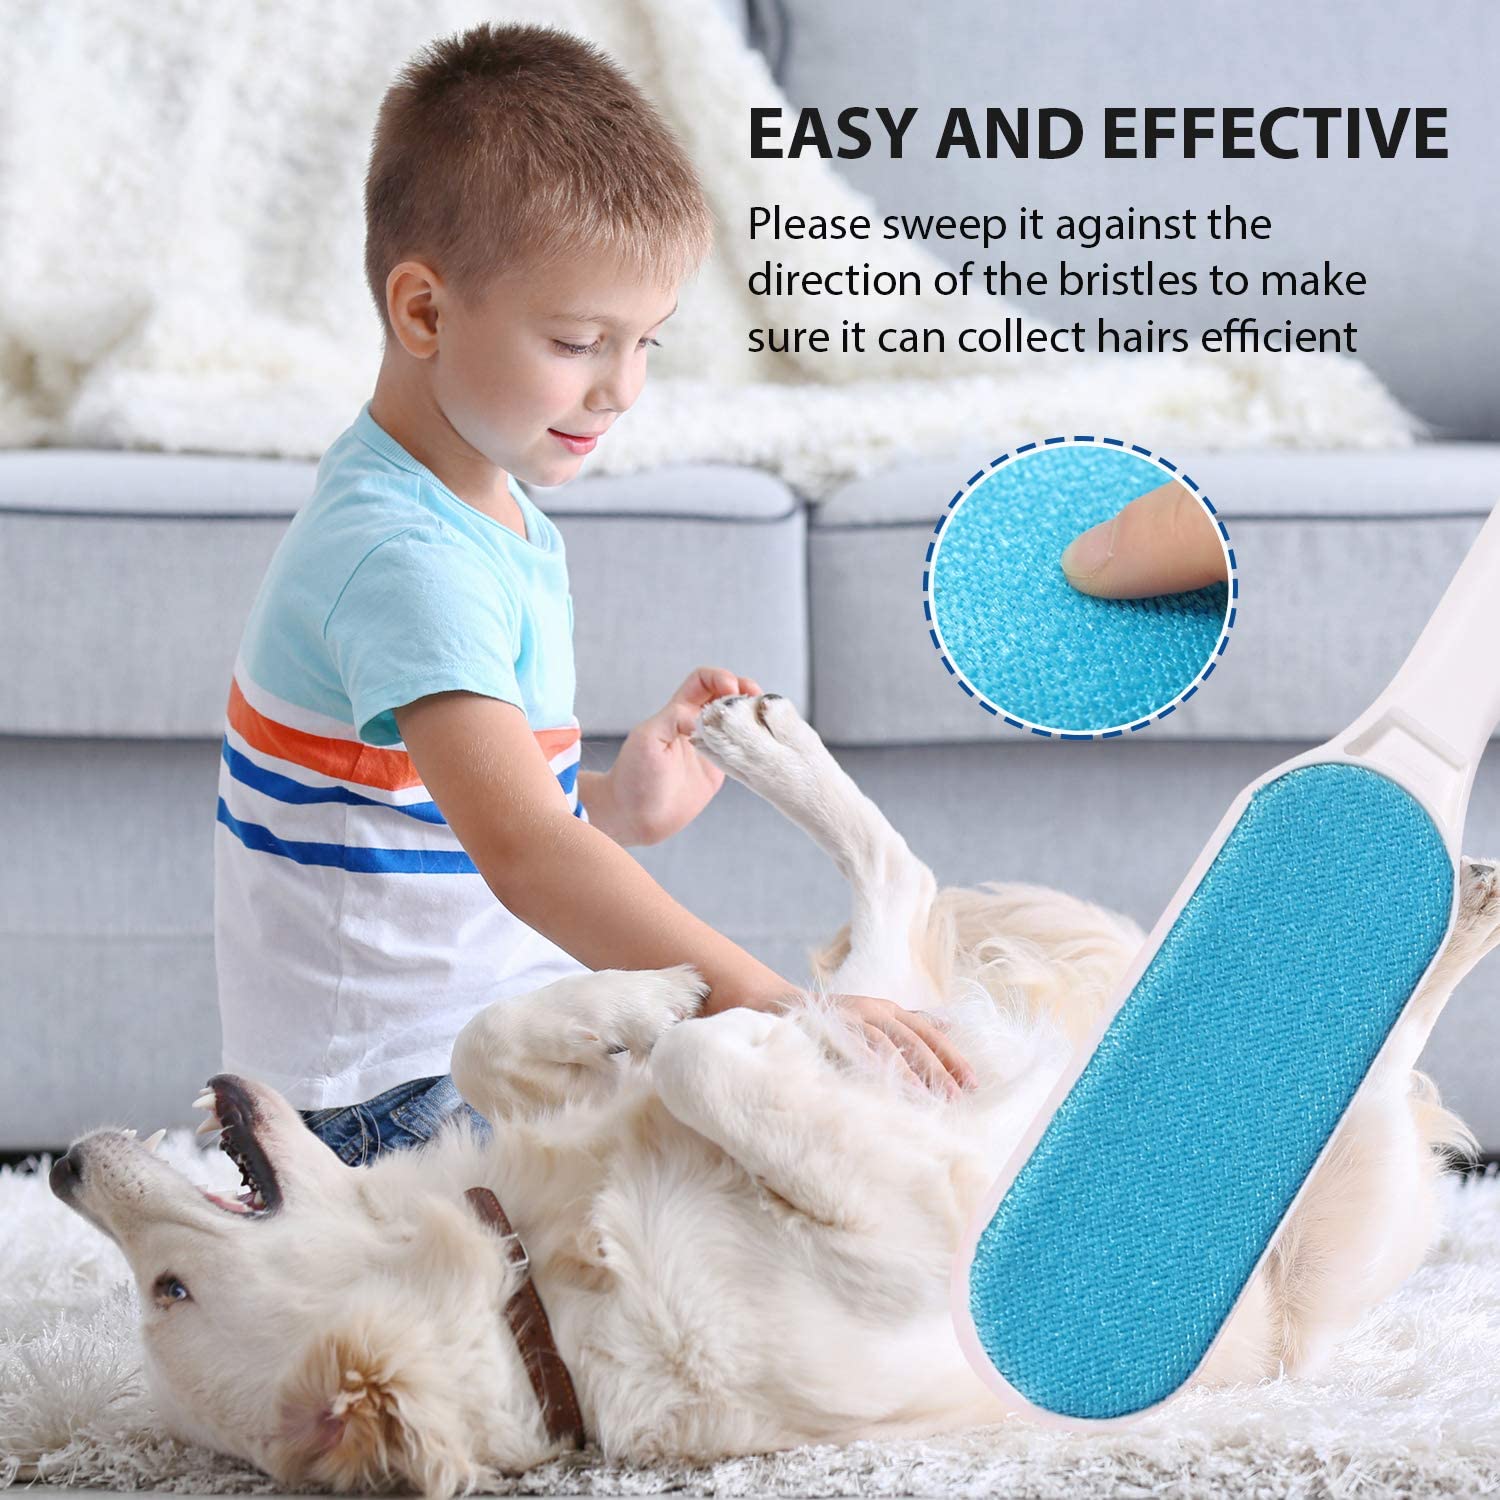 Pet Hair Remover - 1 Double-Sided Standard-Size, 1 Travel Pet Hair Removal  Brush, Self-Cleaning Base - Remove Cat and Dog Fur, Lint, Fluff from  Carpet, Car Seat, Couch, Clothing, Bedding, Fabric, Blue |